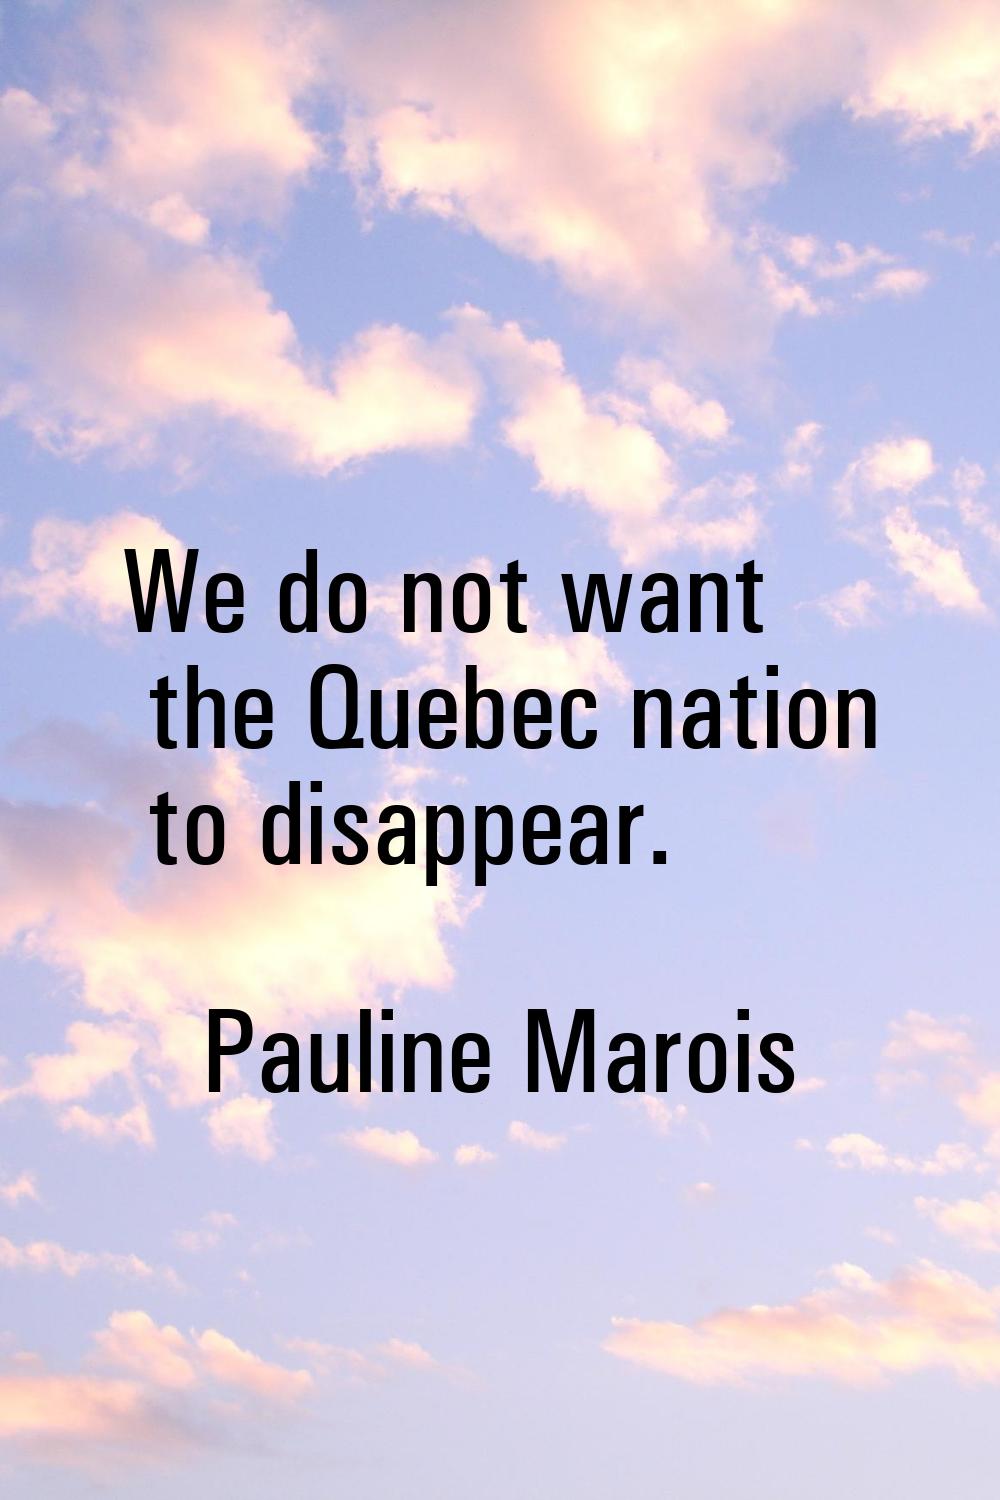 We do not want the Quebec nation to disappear.